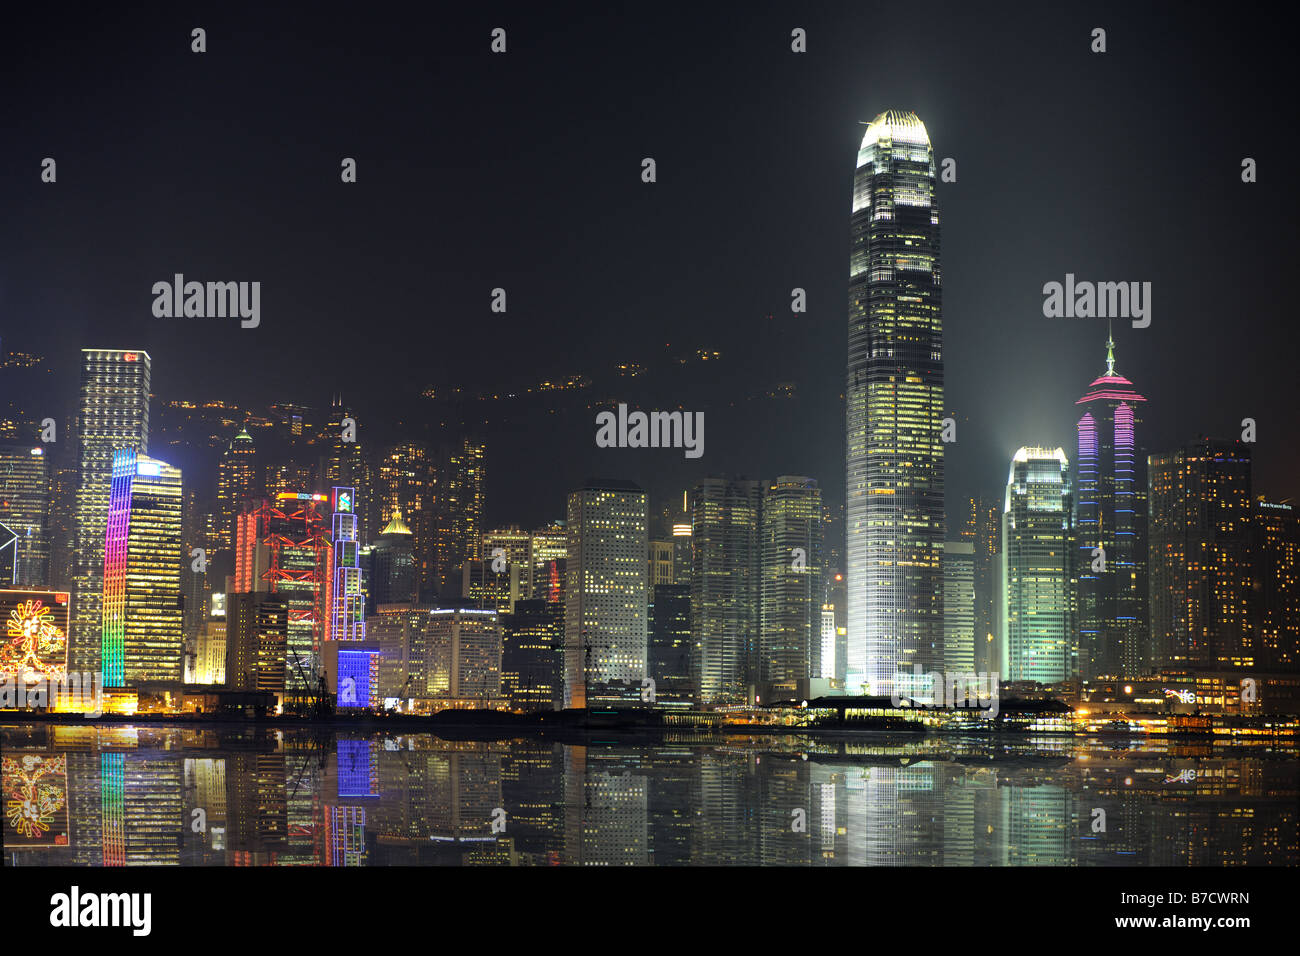 Night scene of Hong Kong you can see the pollution Stock Photo